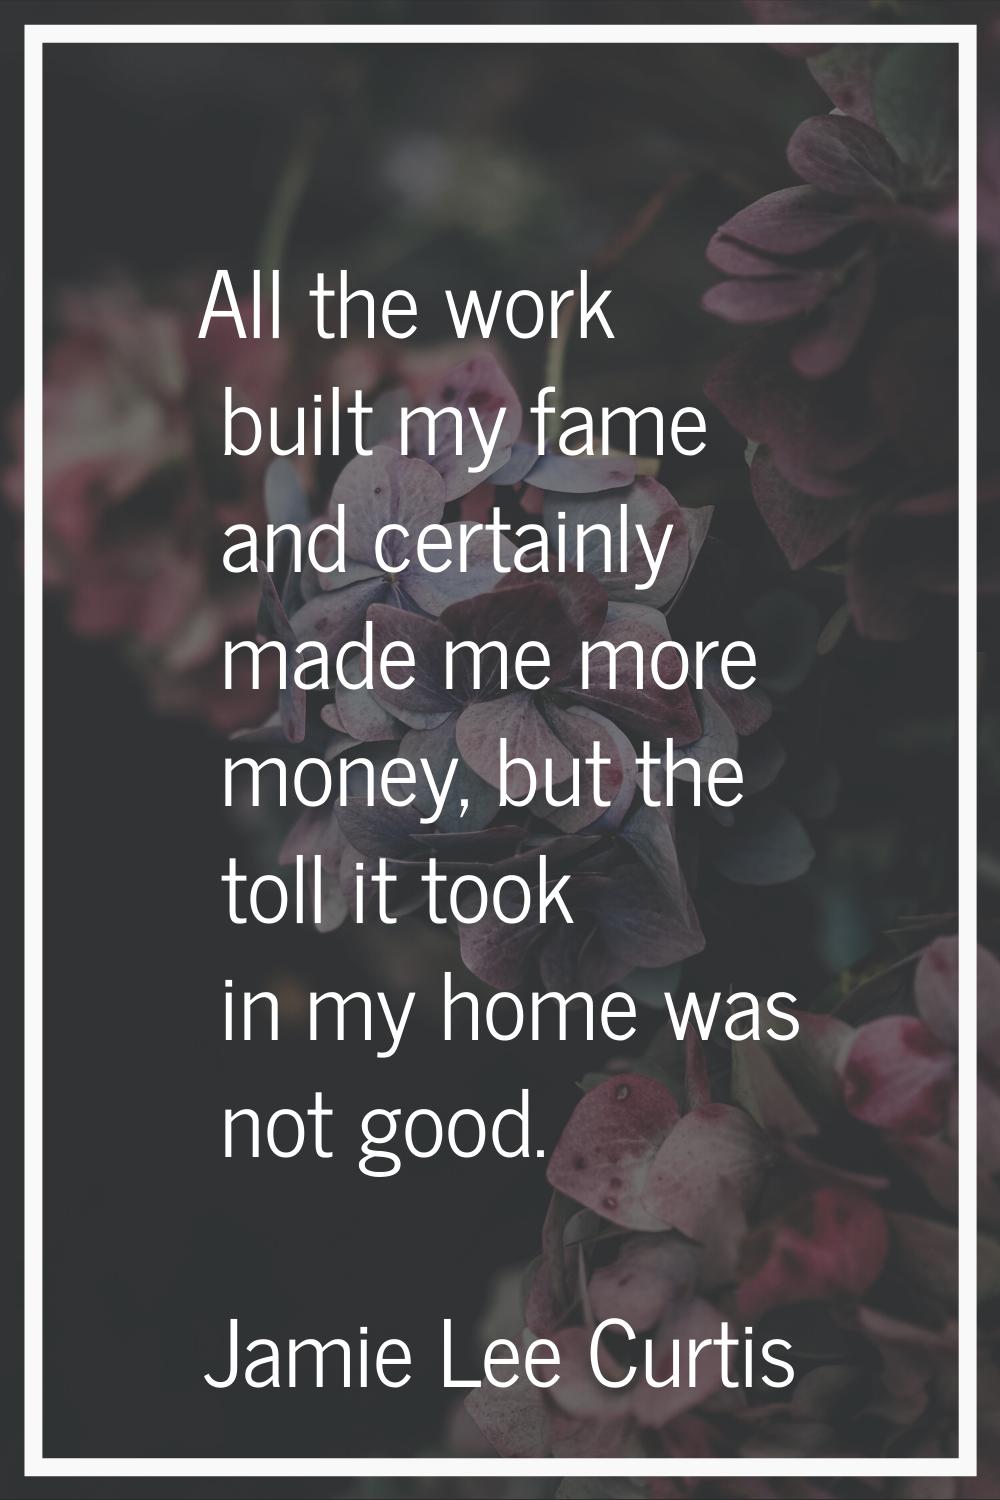 All the work built my fame and certainly made me more money, but the toll it took in my home was no